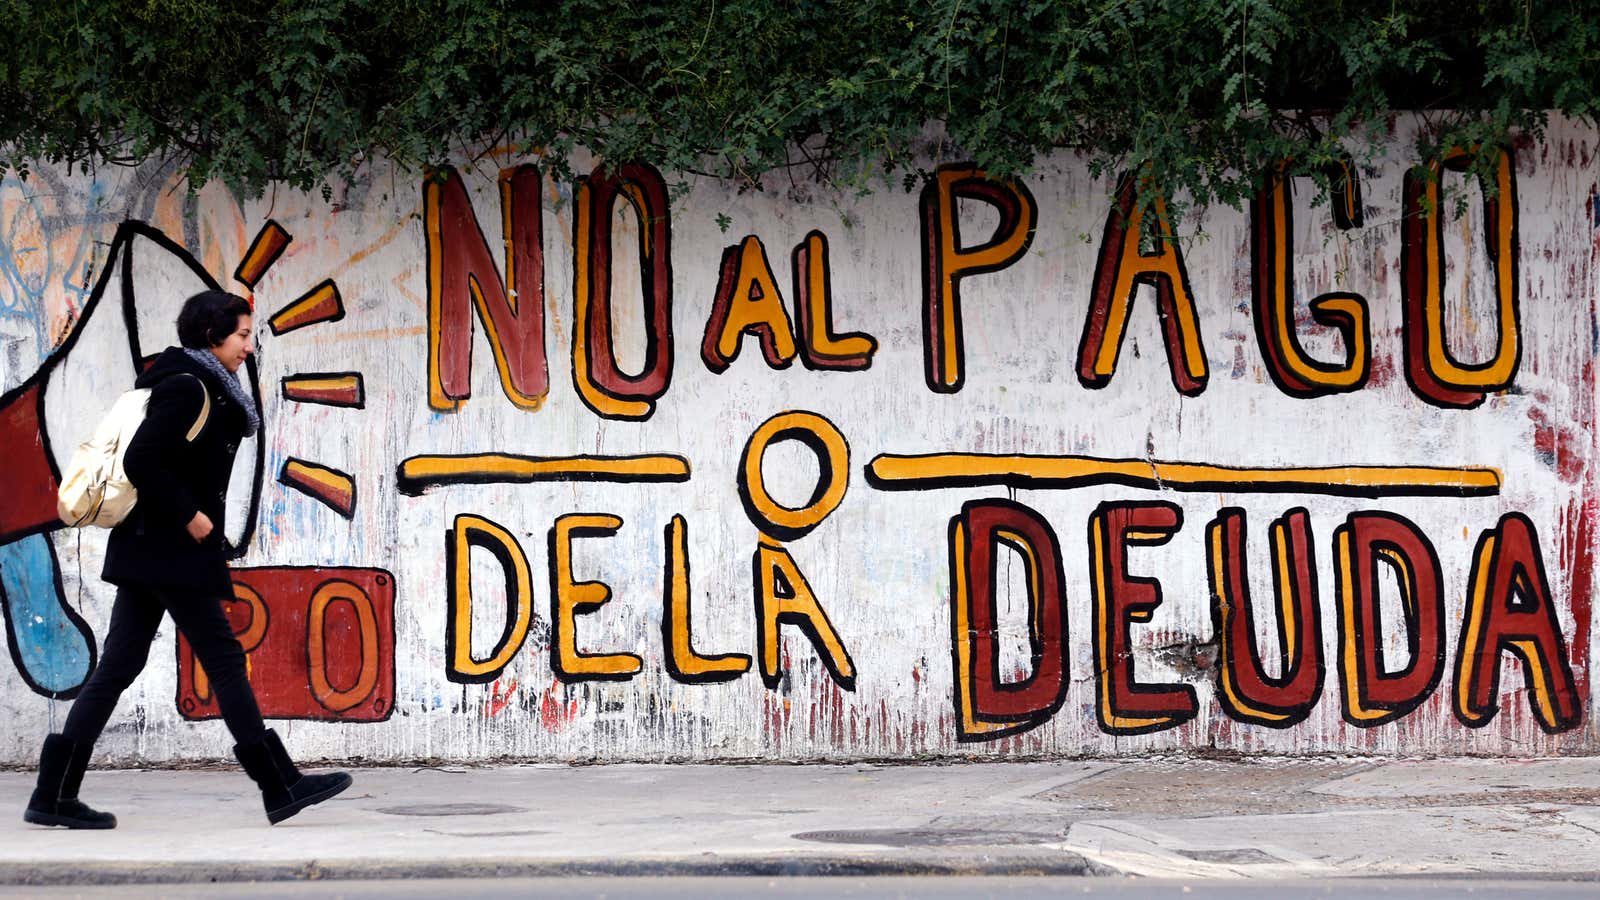 The message on the streets of Argentina: “No to the debt payment.”